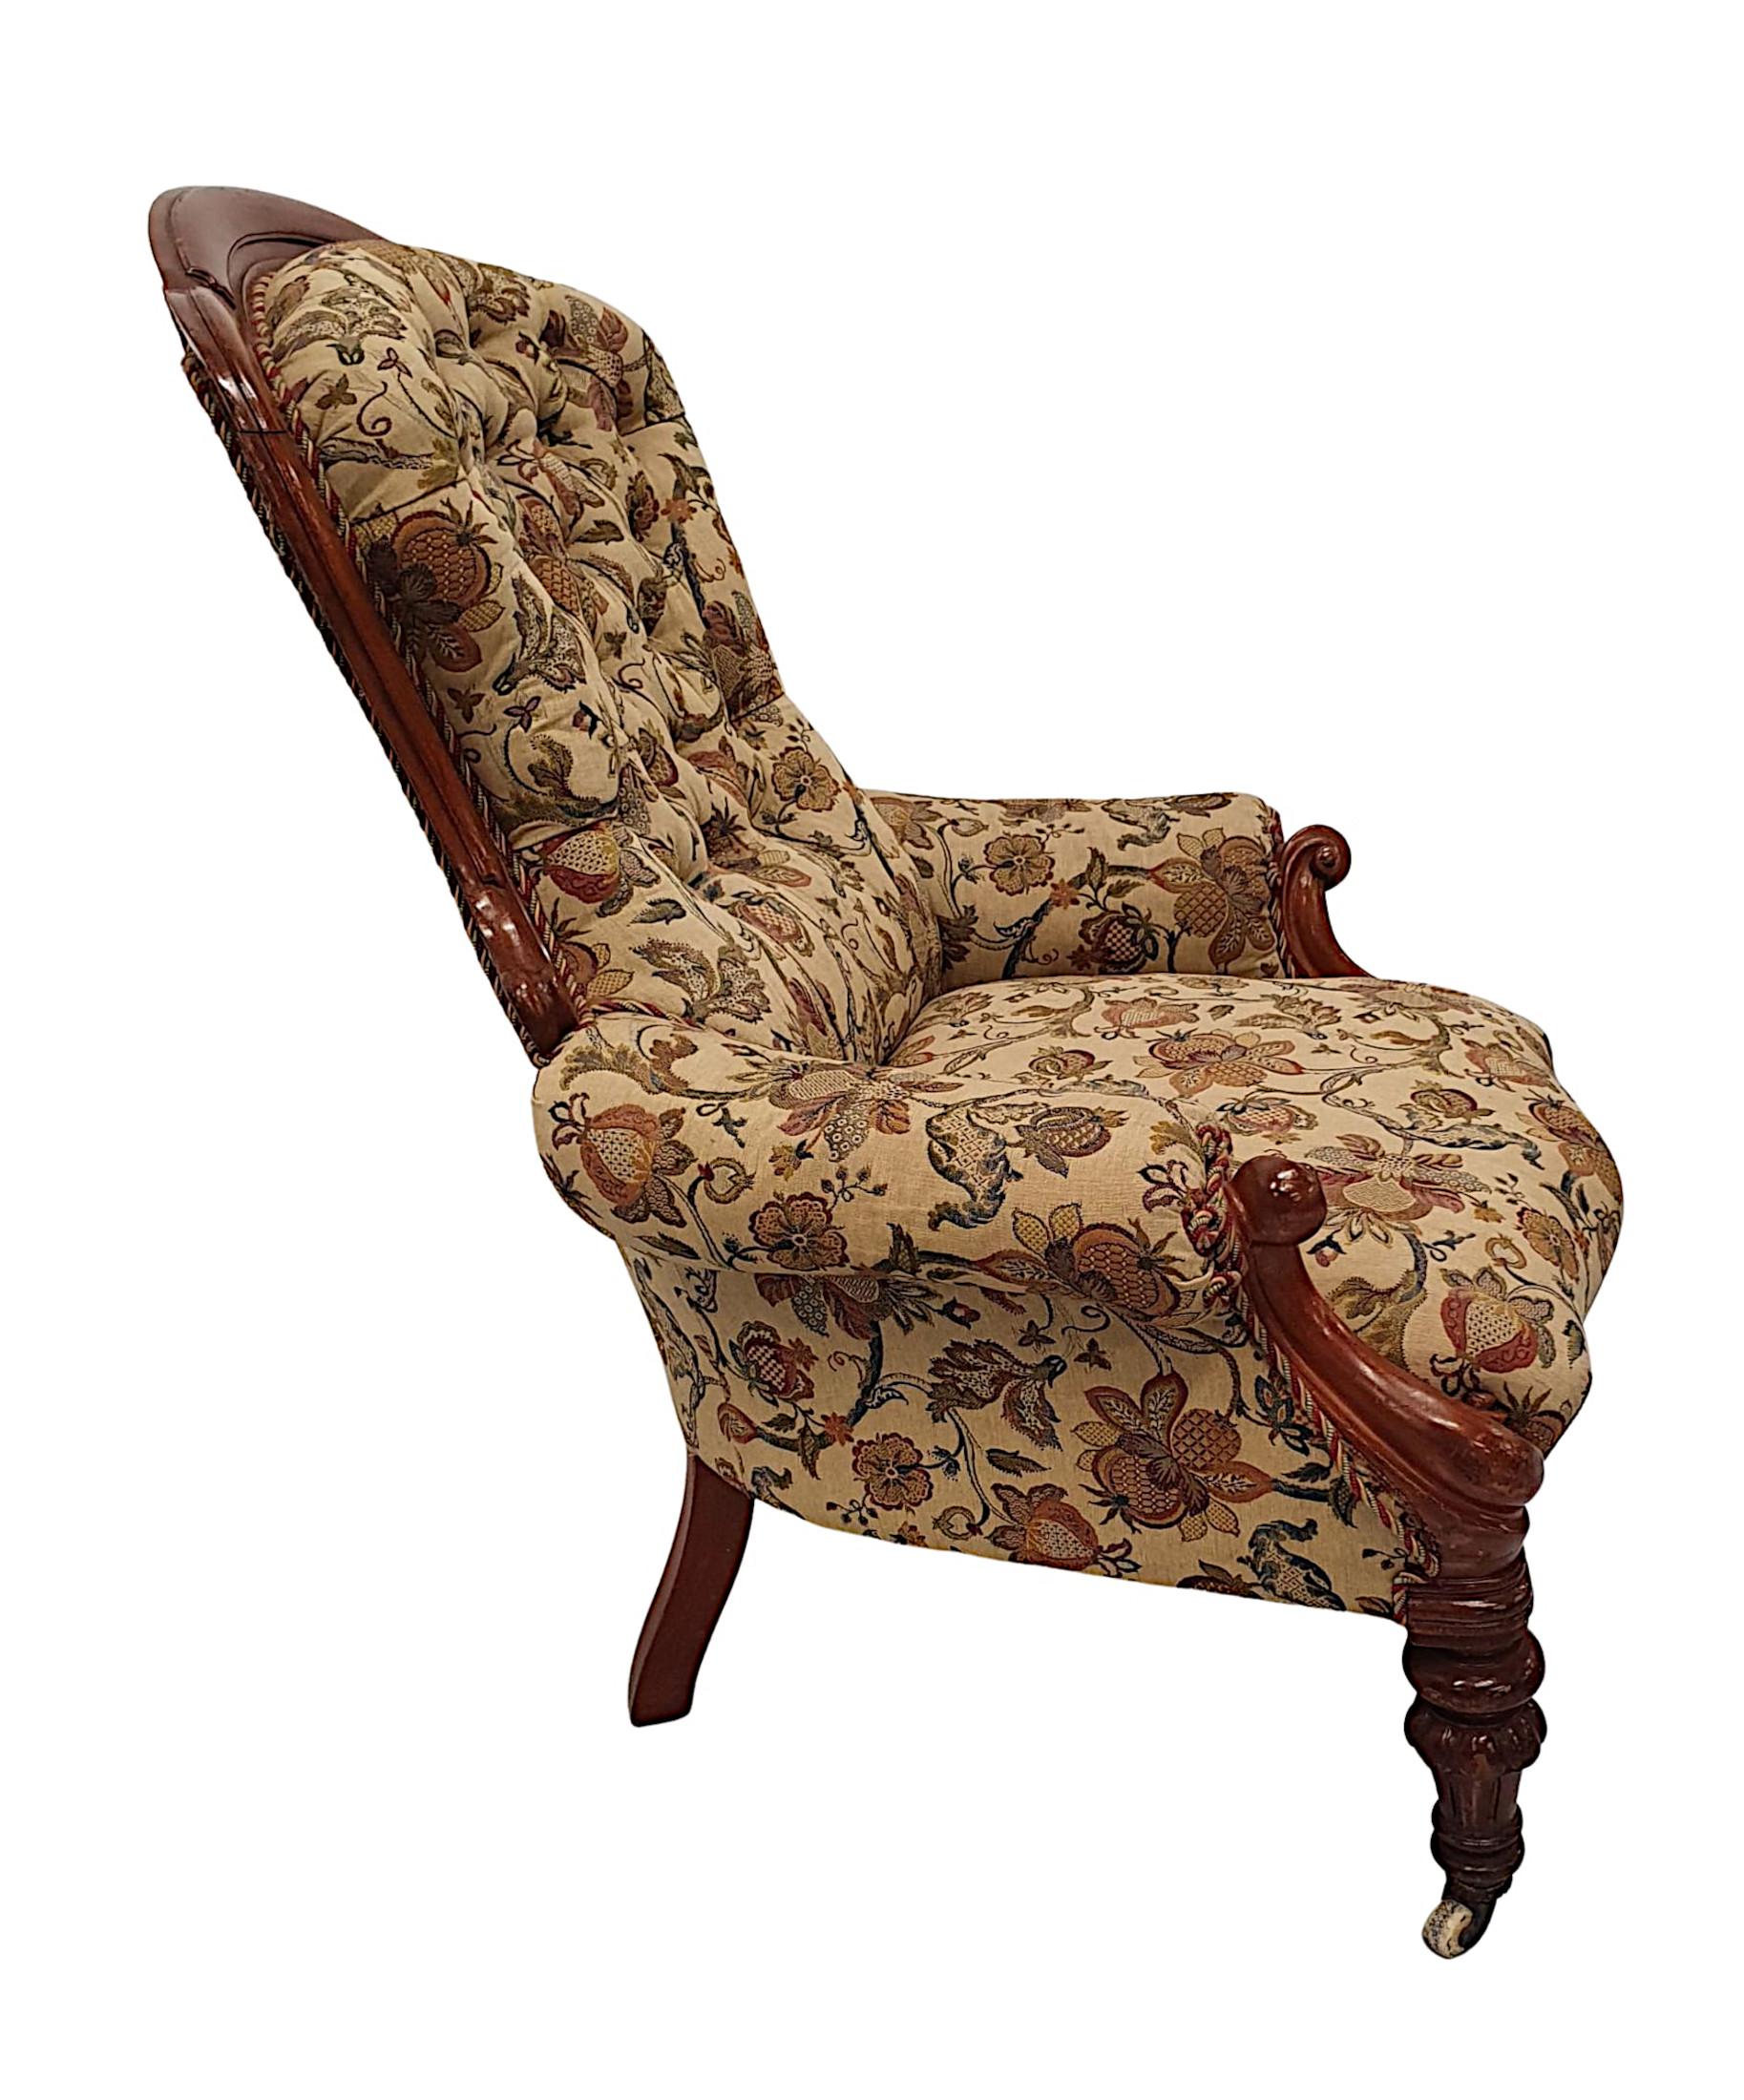 A gorgeous 19th Century mahogany button back armchair, fully restored and of fabulous quality. The curved back framed with beautifully hand carved mahogany scroll detail raised over out scrolling arms with stunning scroll supports raised over